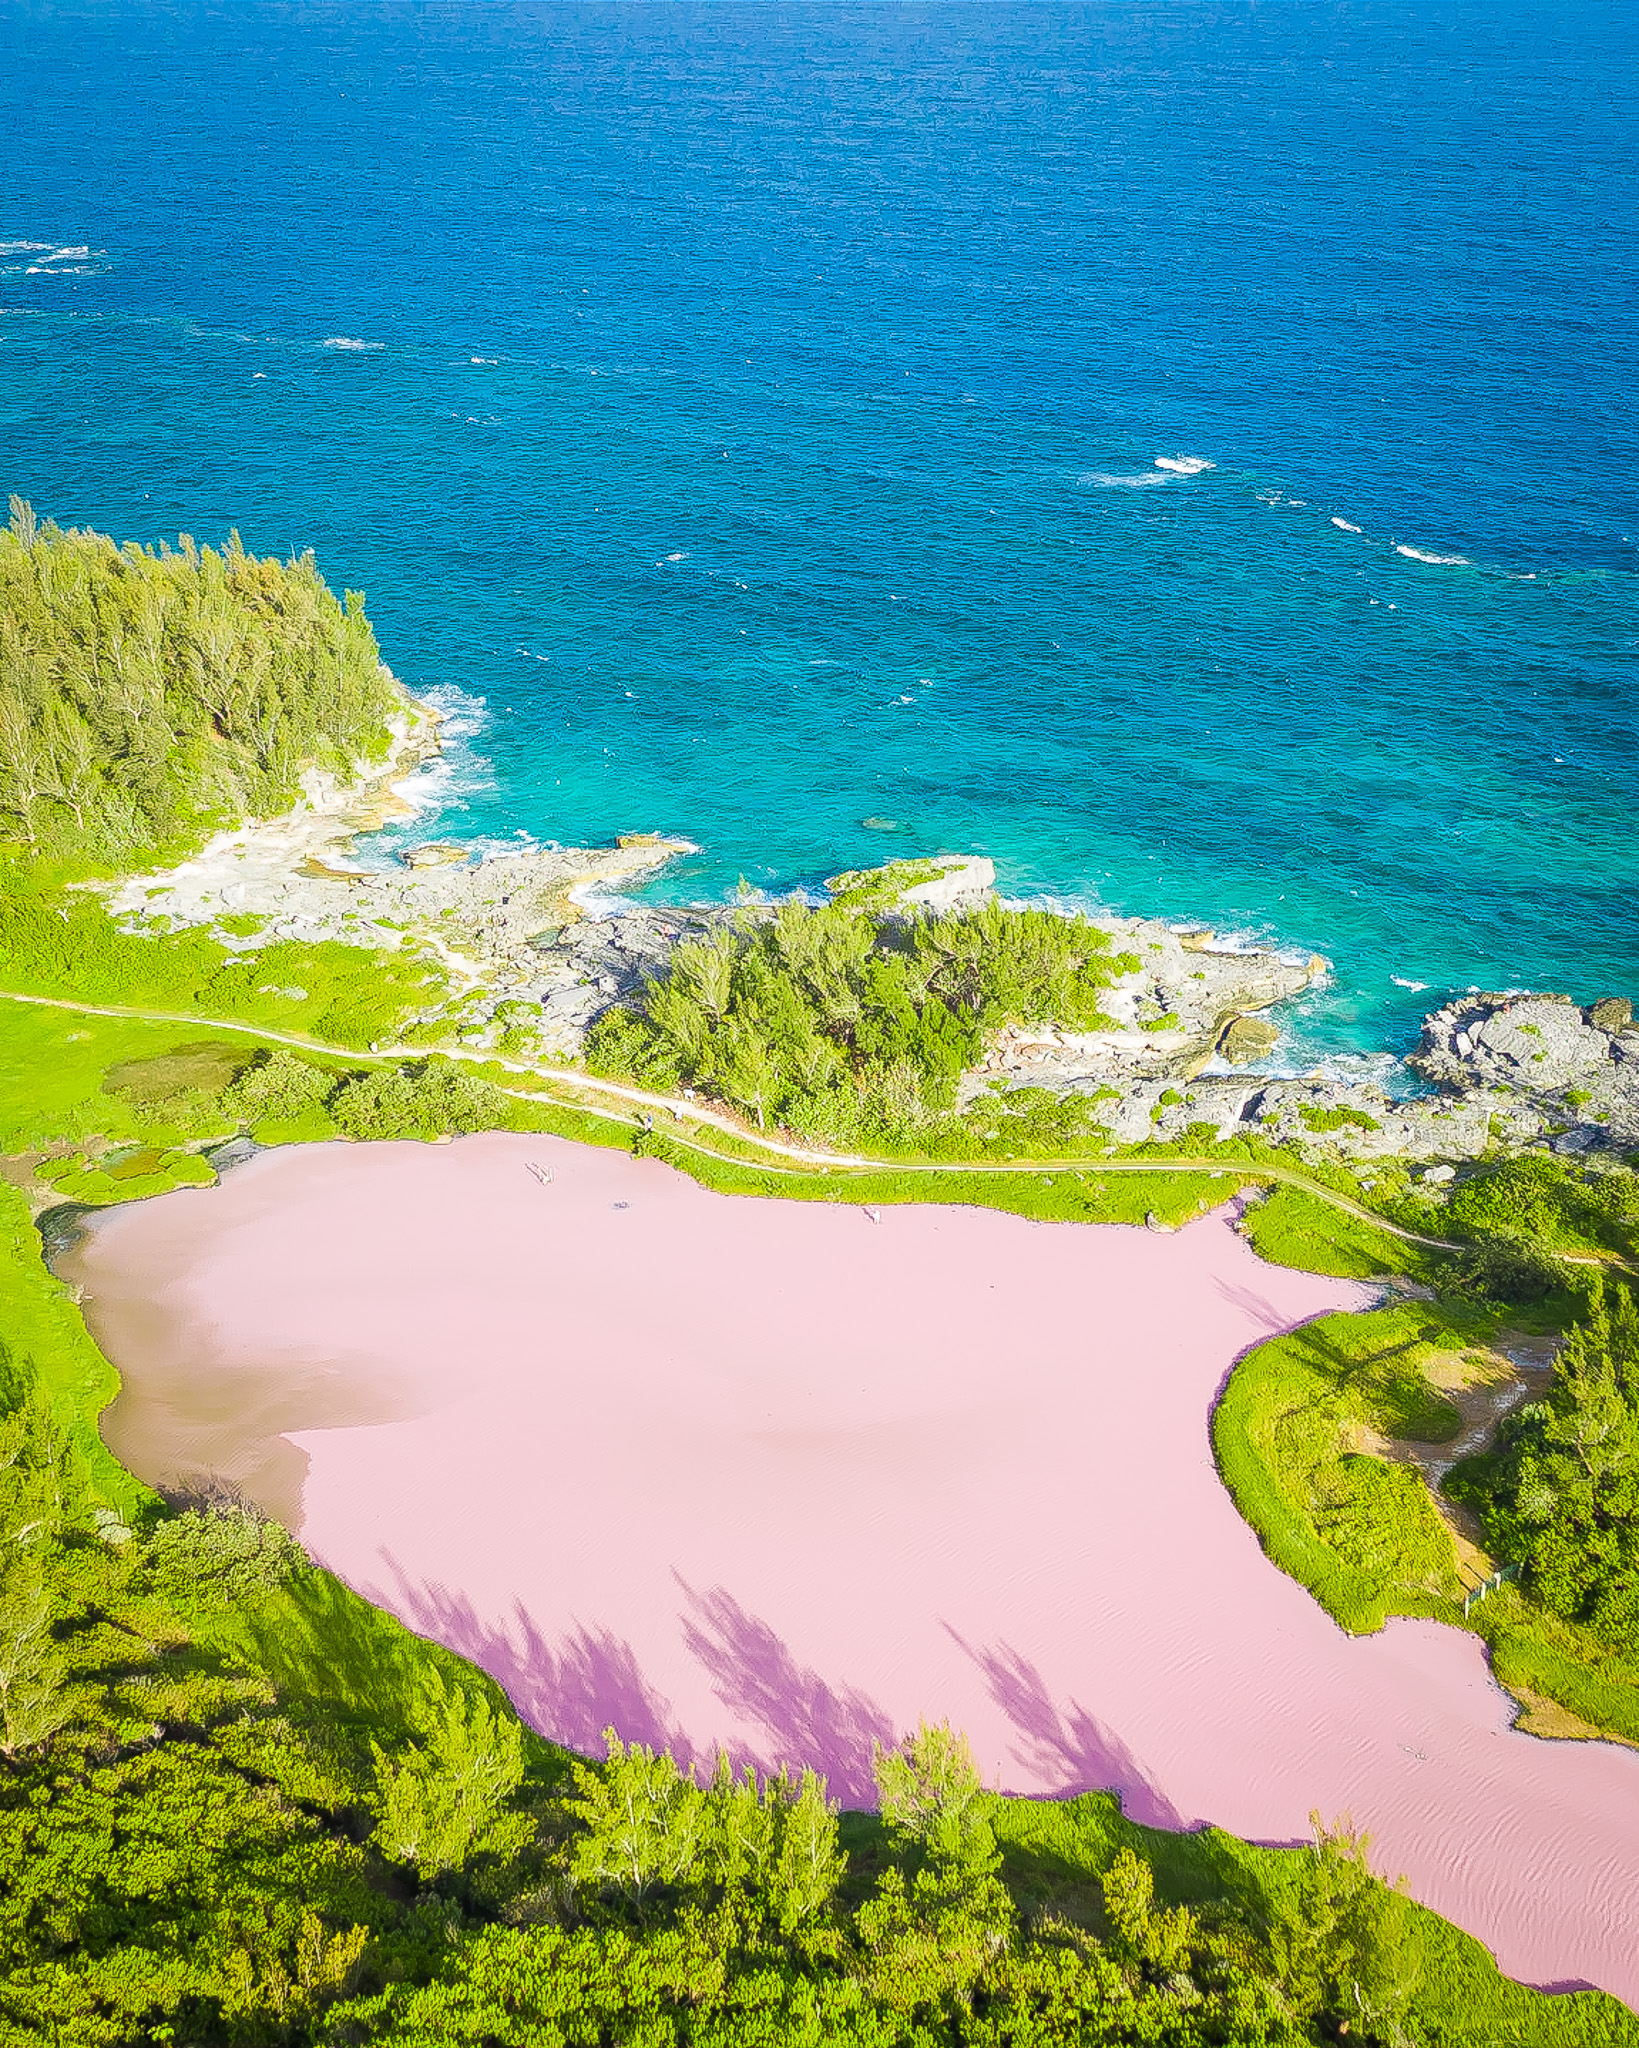 Drone Photo of Spittal Pond a pink pond in Bermuda